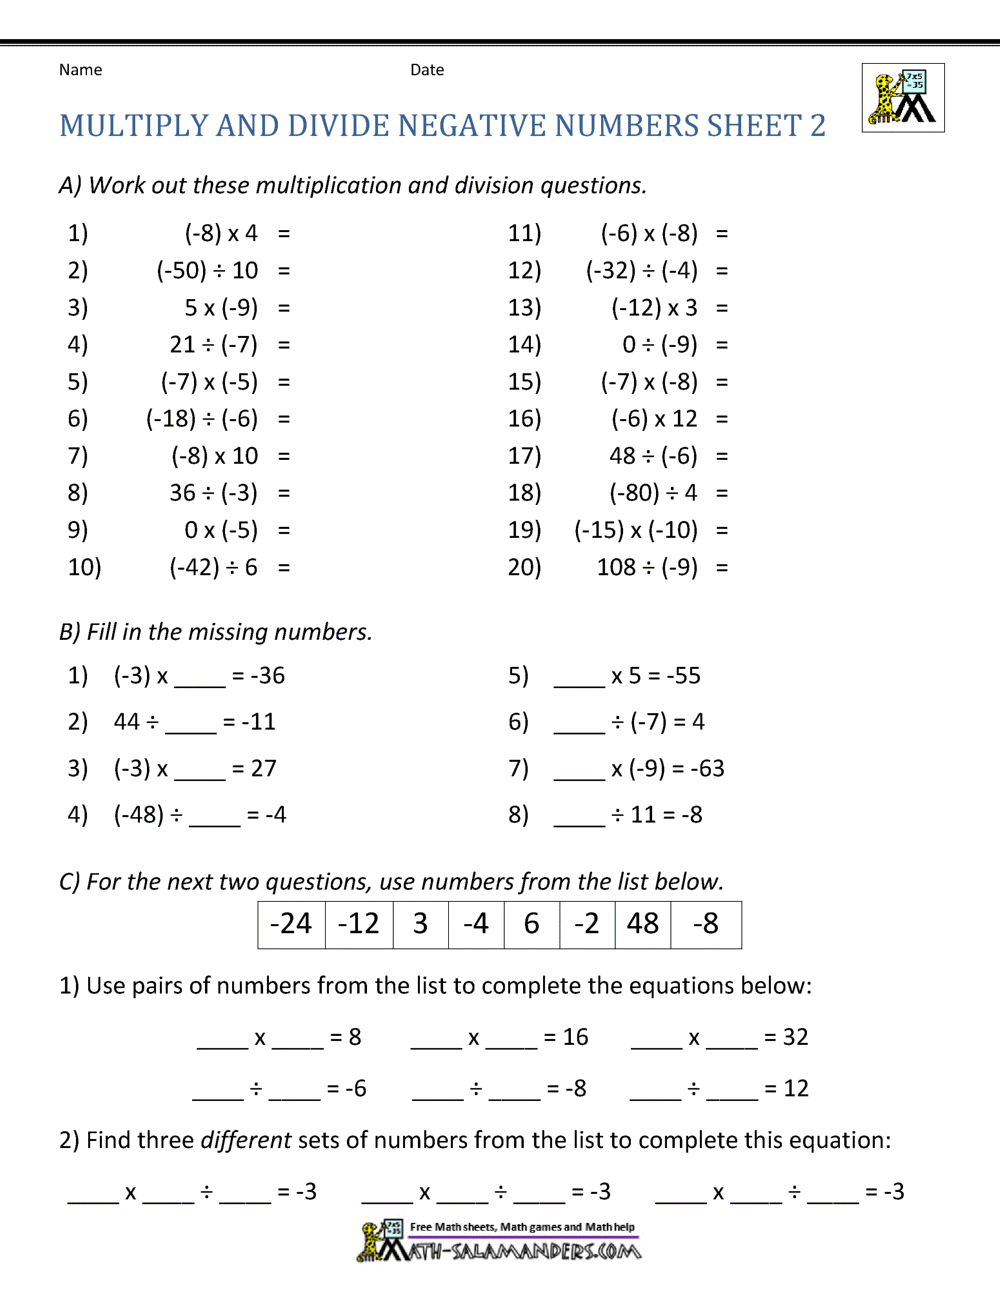 Multiply and Divide Negative Numbers In Multiplying Negative Numbers Worksheet